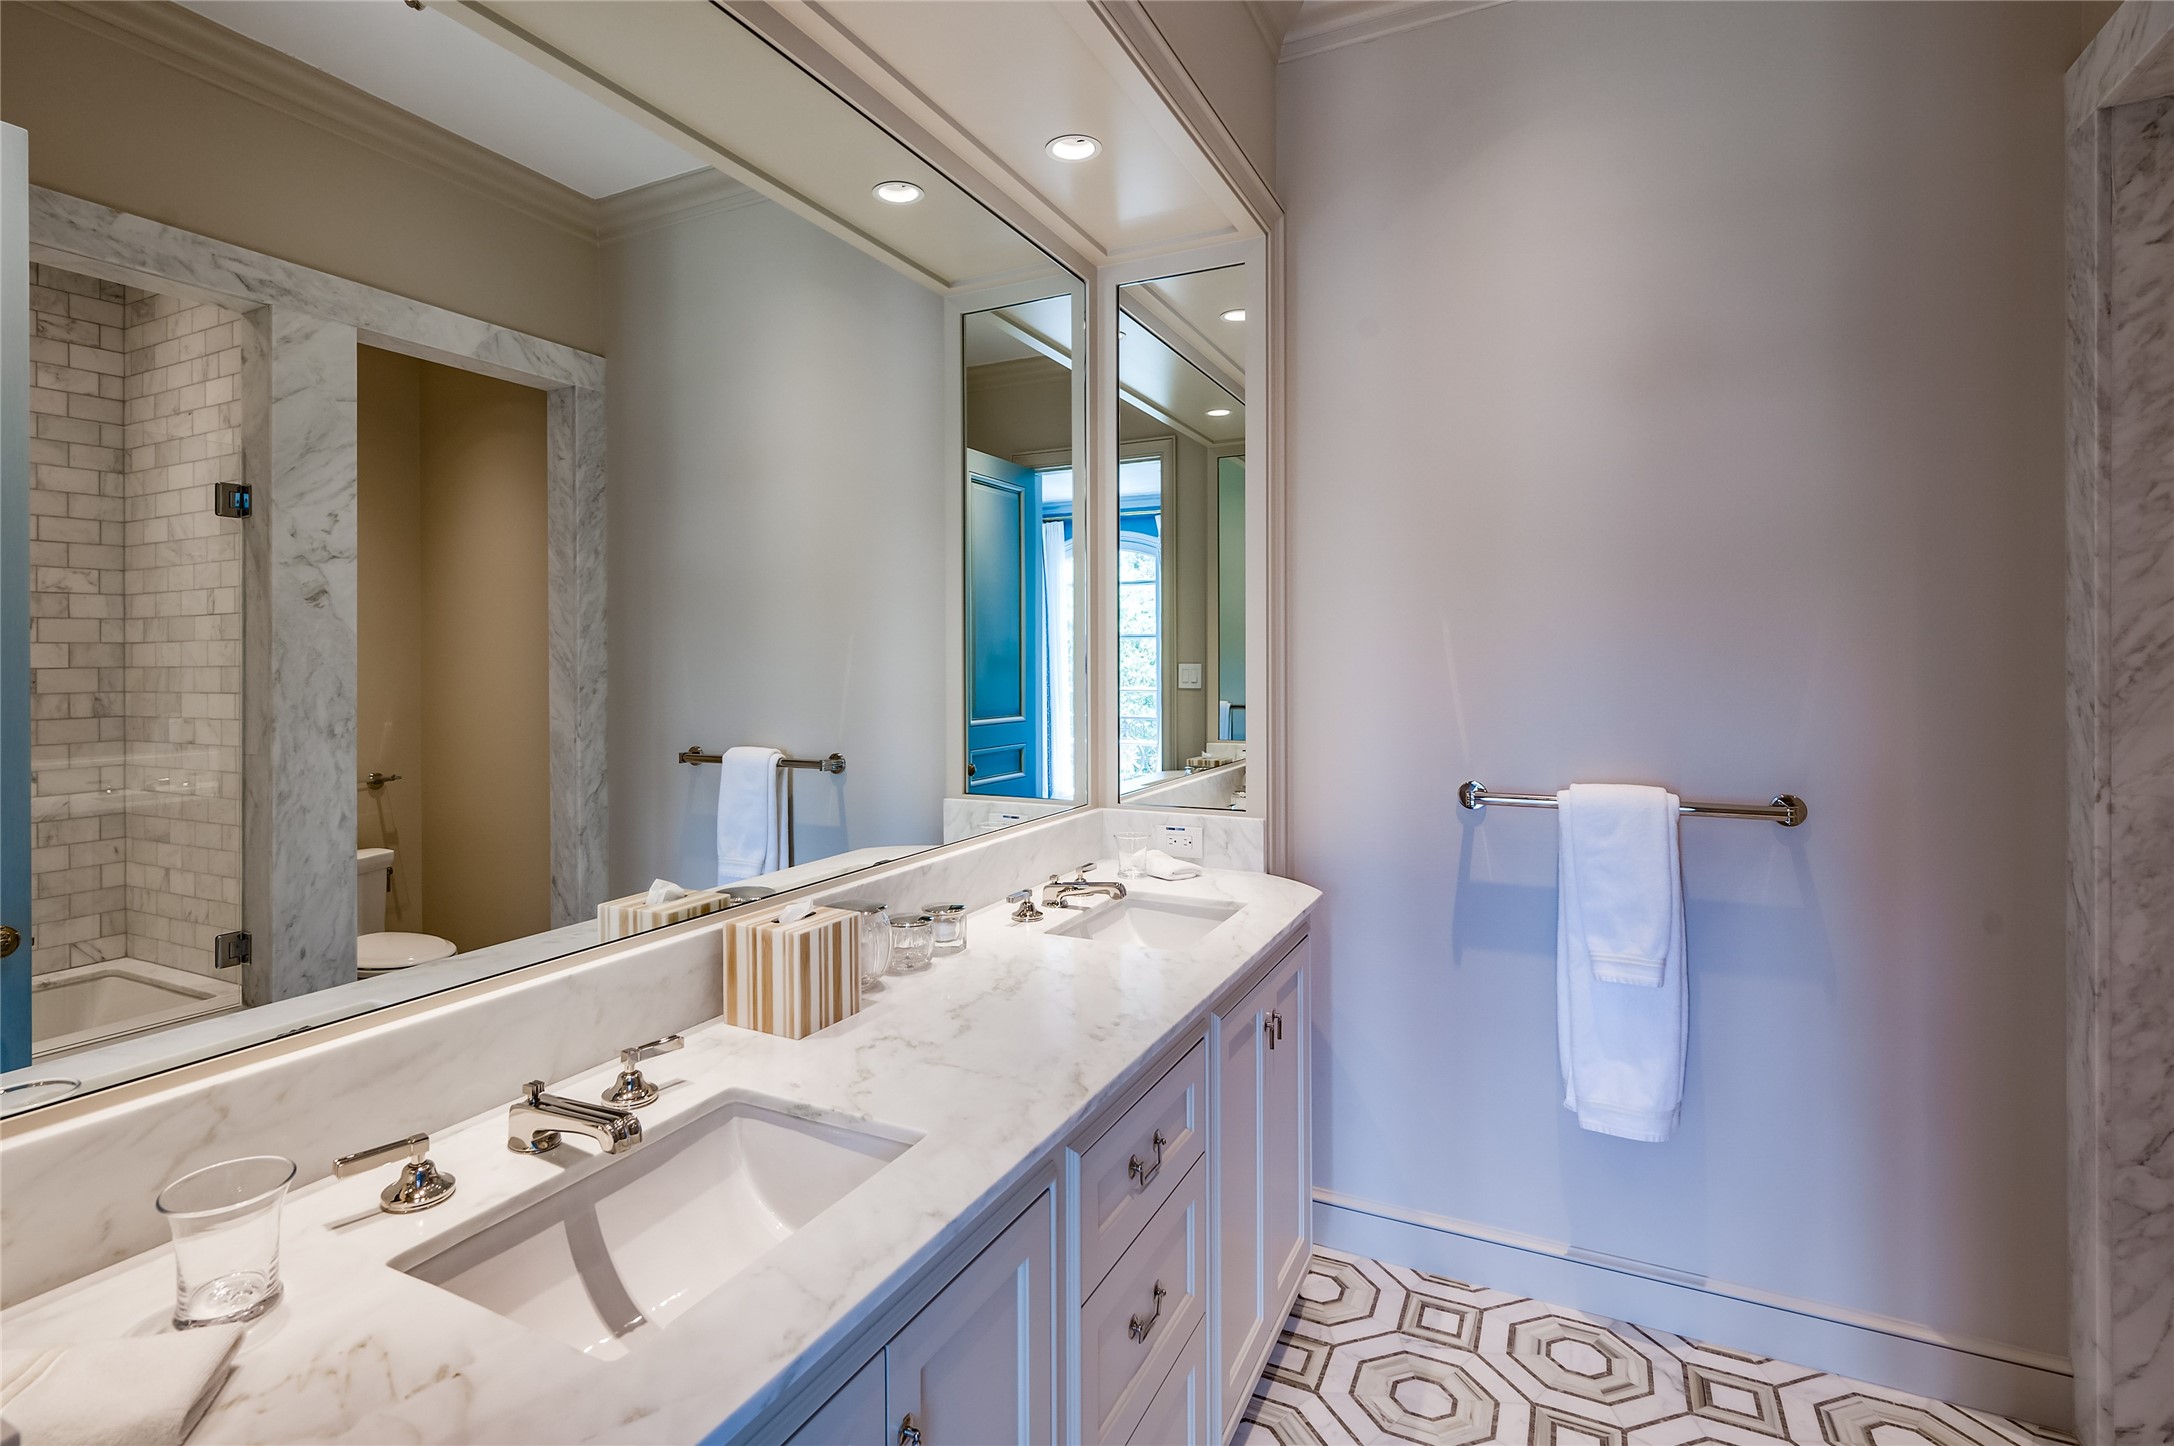 Guest bathroom includes dual vanity, hexagon tile and shower/tub combo with glass paneled door.